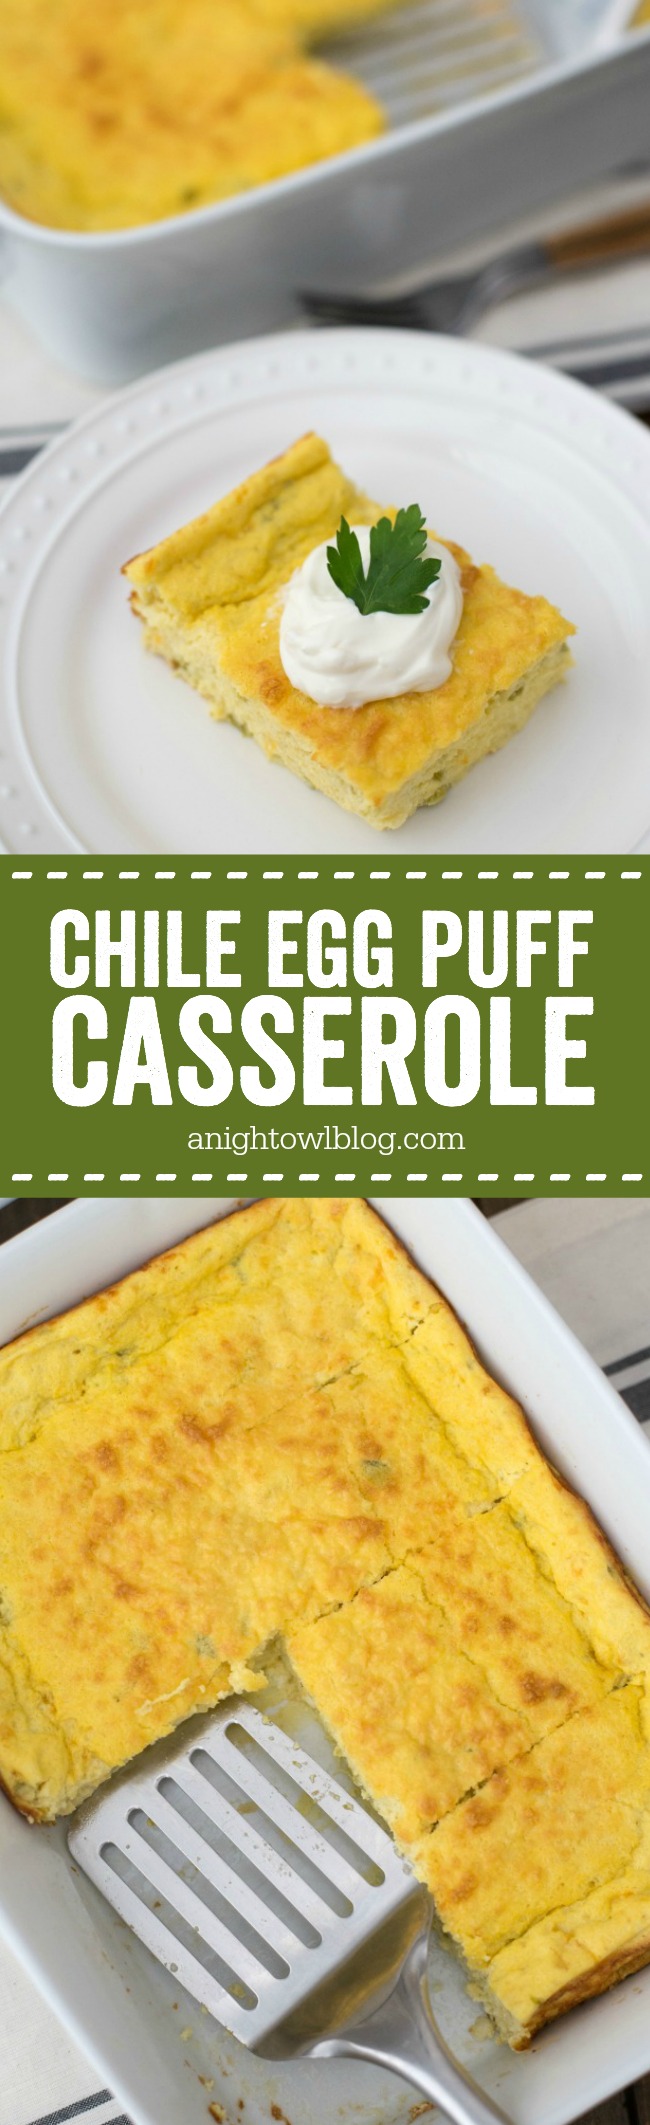 This Chile Egg Puff Casserole is easy, delicious and perfect for brunch!